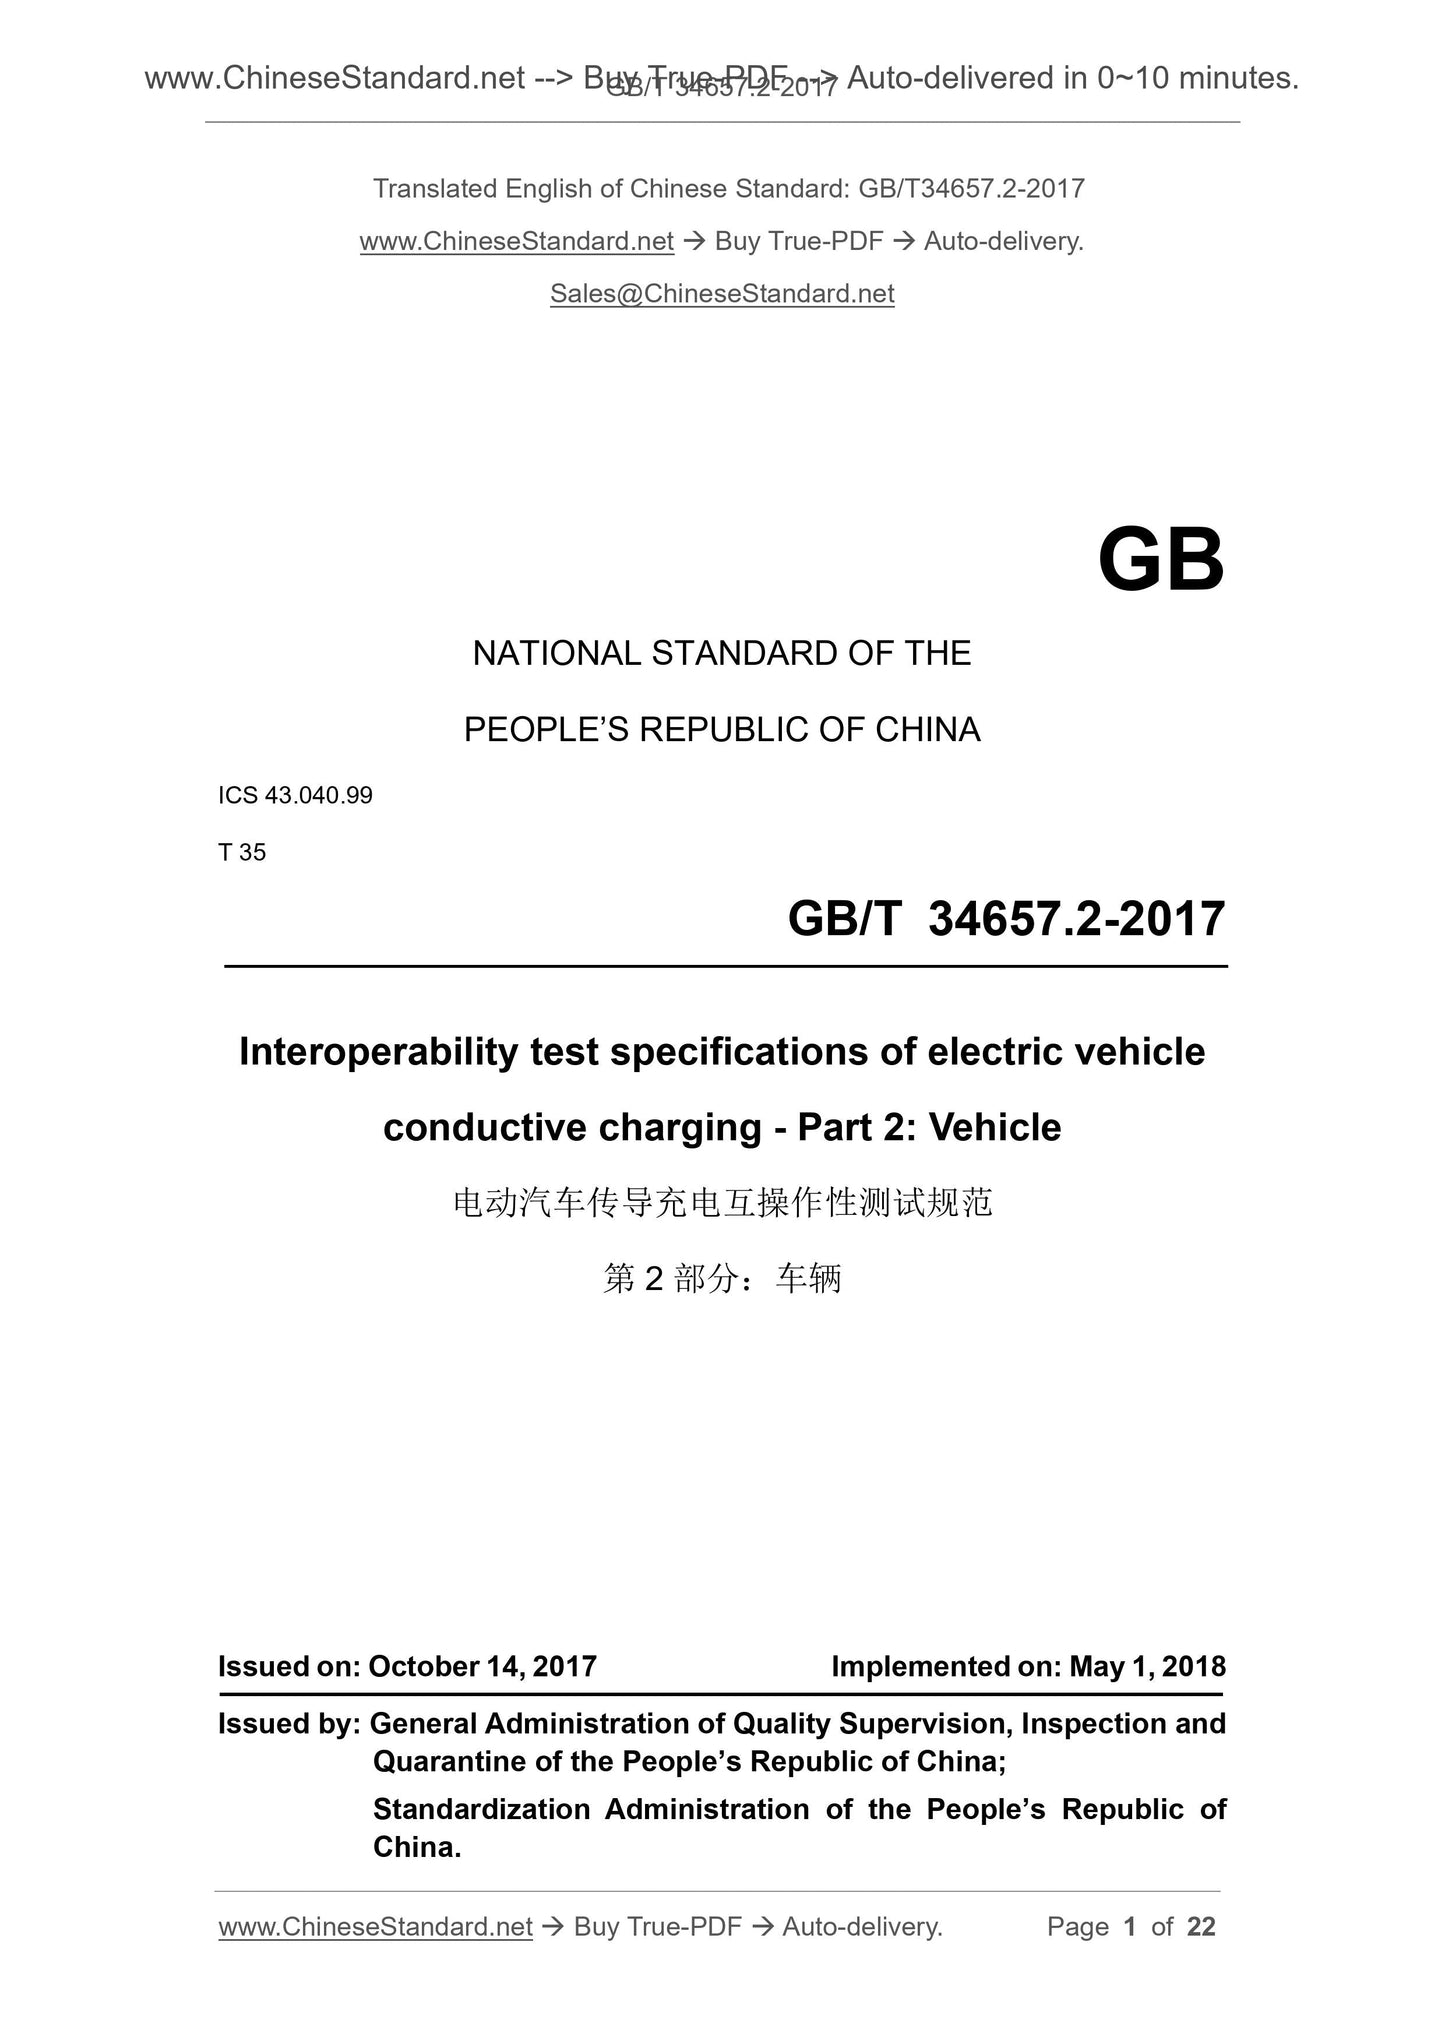 GB/T 34657.2-2017 Page 1